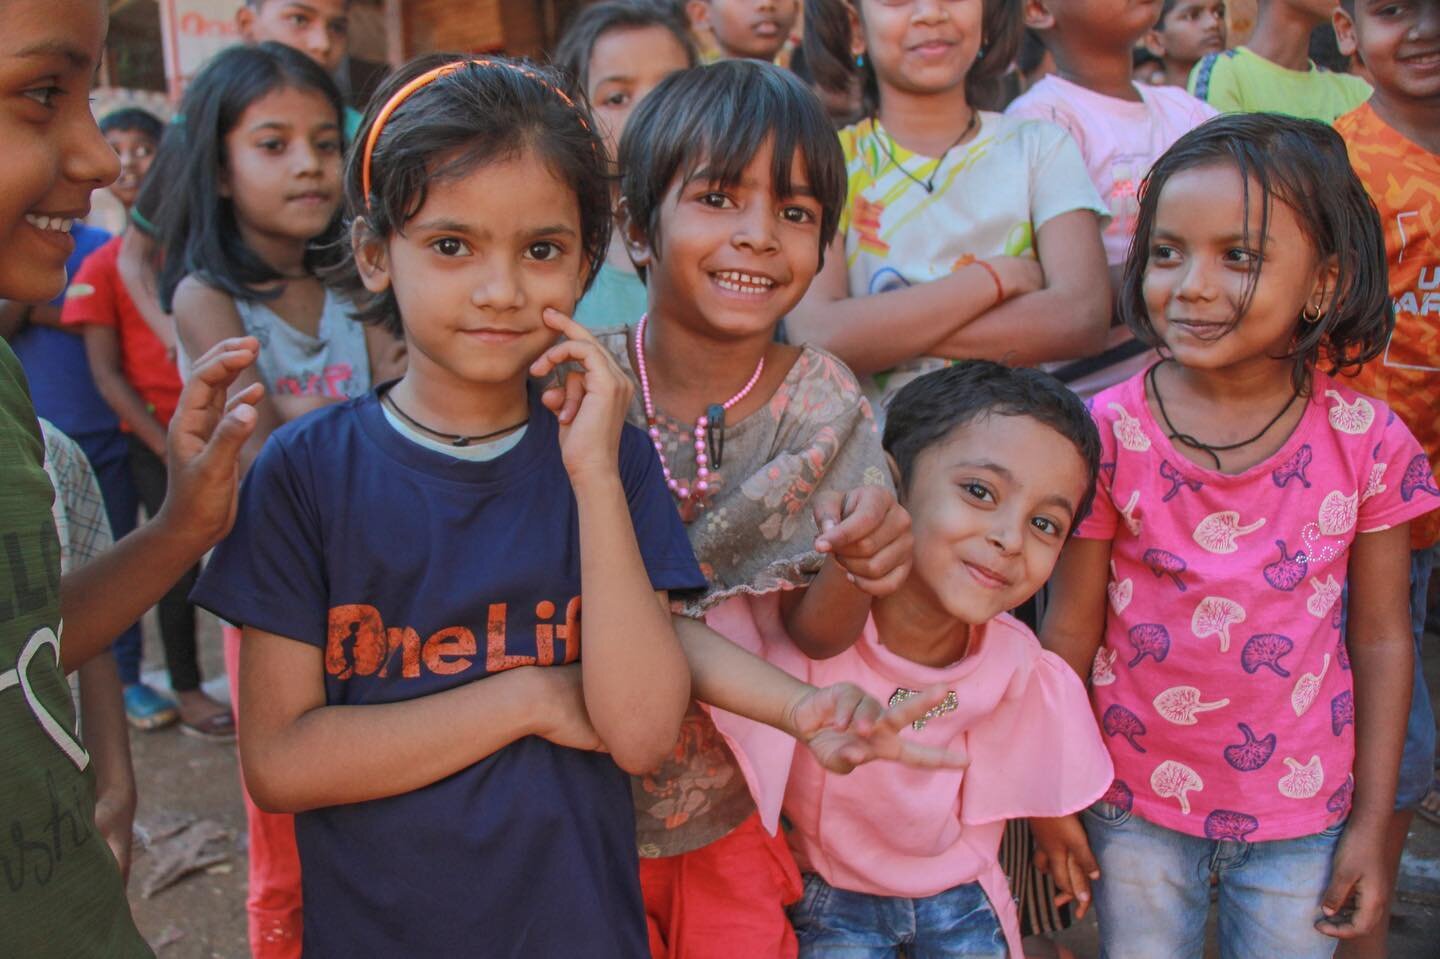 Just a few of the precious kids we have the privilege of serving here at One Life Movement. With one look at their smiling faces, you&rsquo;ll see the importance of making a difference &ldquo;one life&rdquo; at a time. 🧡 

#onelifemovement #olm #ngo